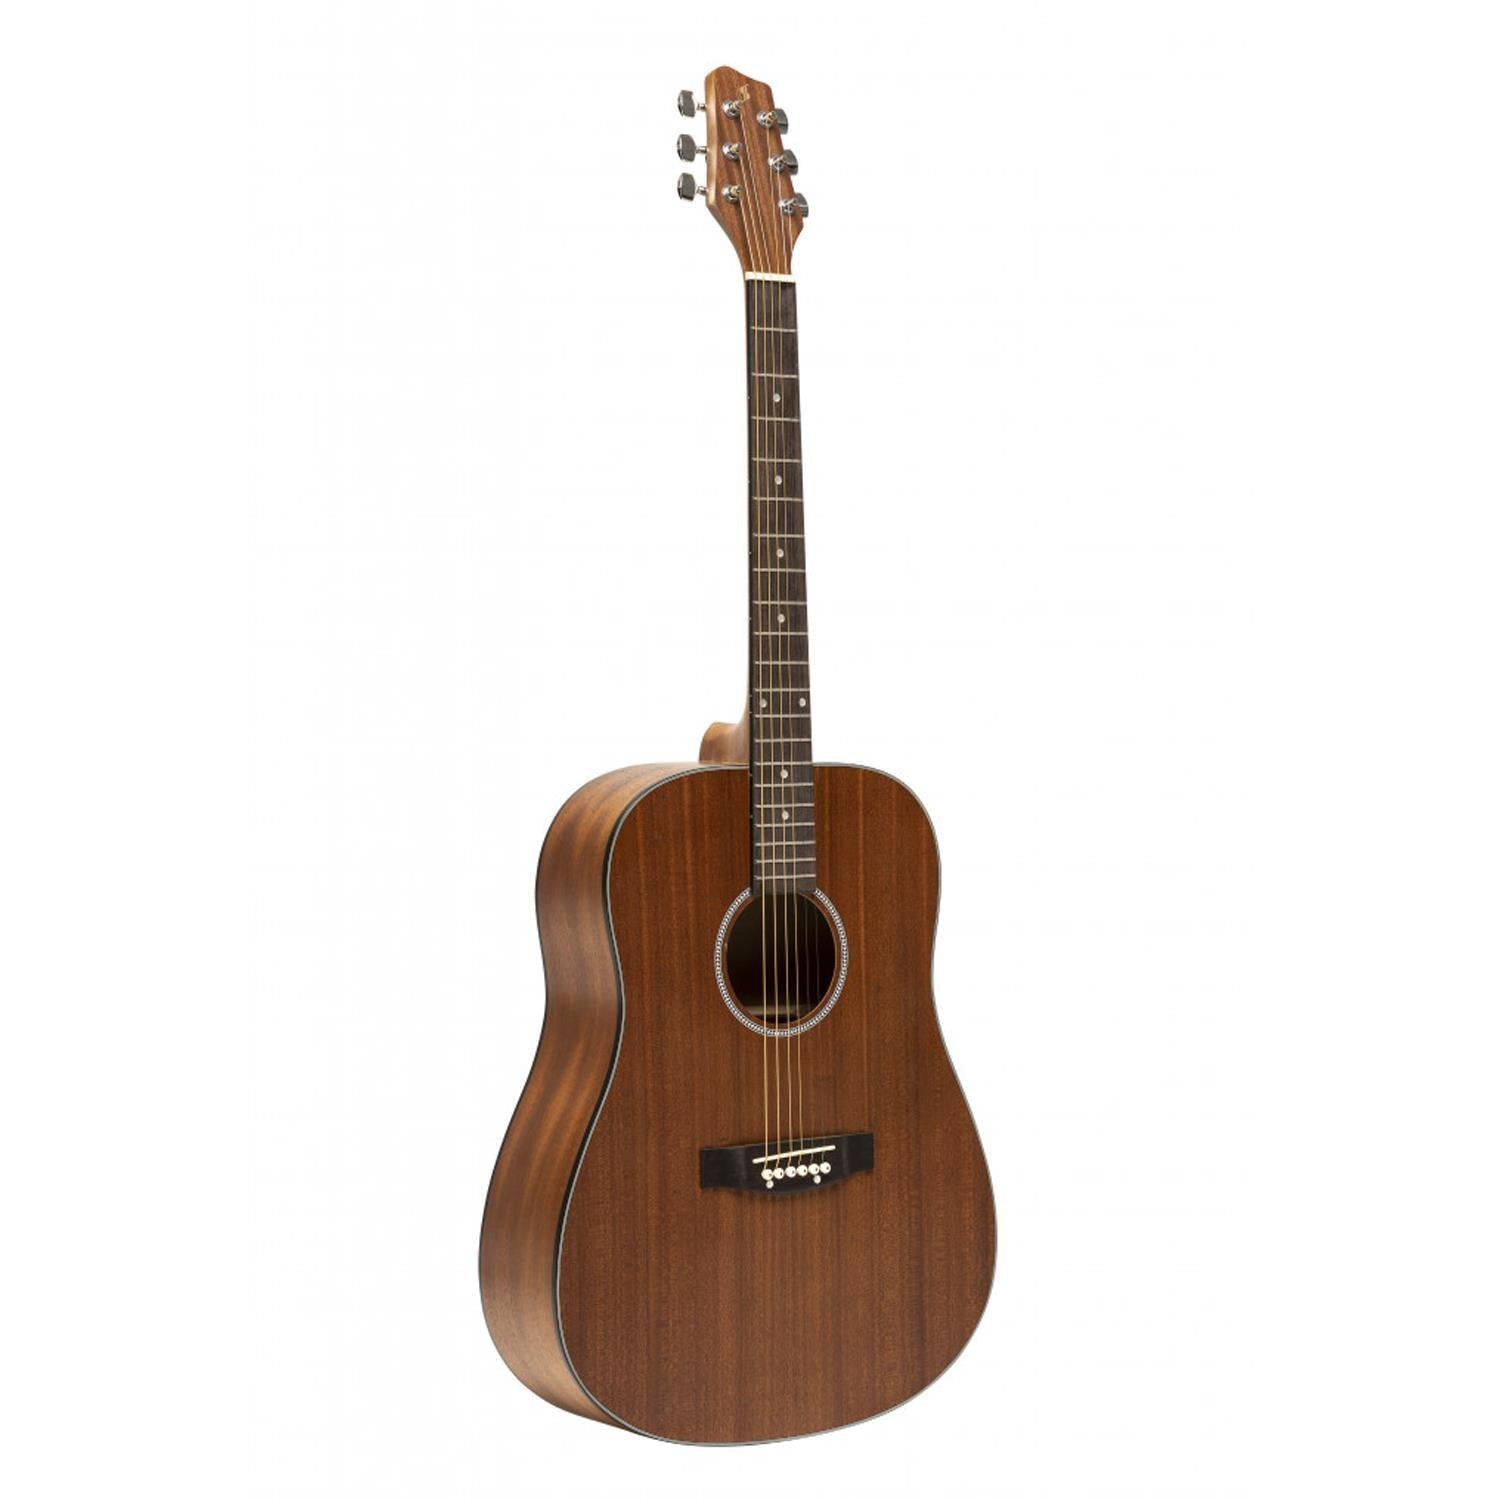 Stagg SA25 D MAHO Acoustic Dreadnought Guitar - DY Pro Audio